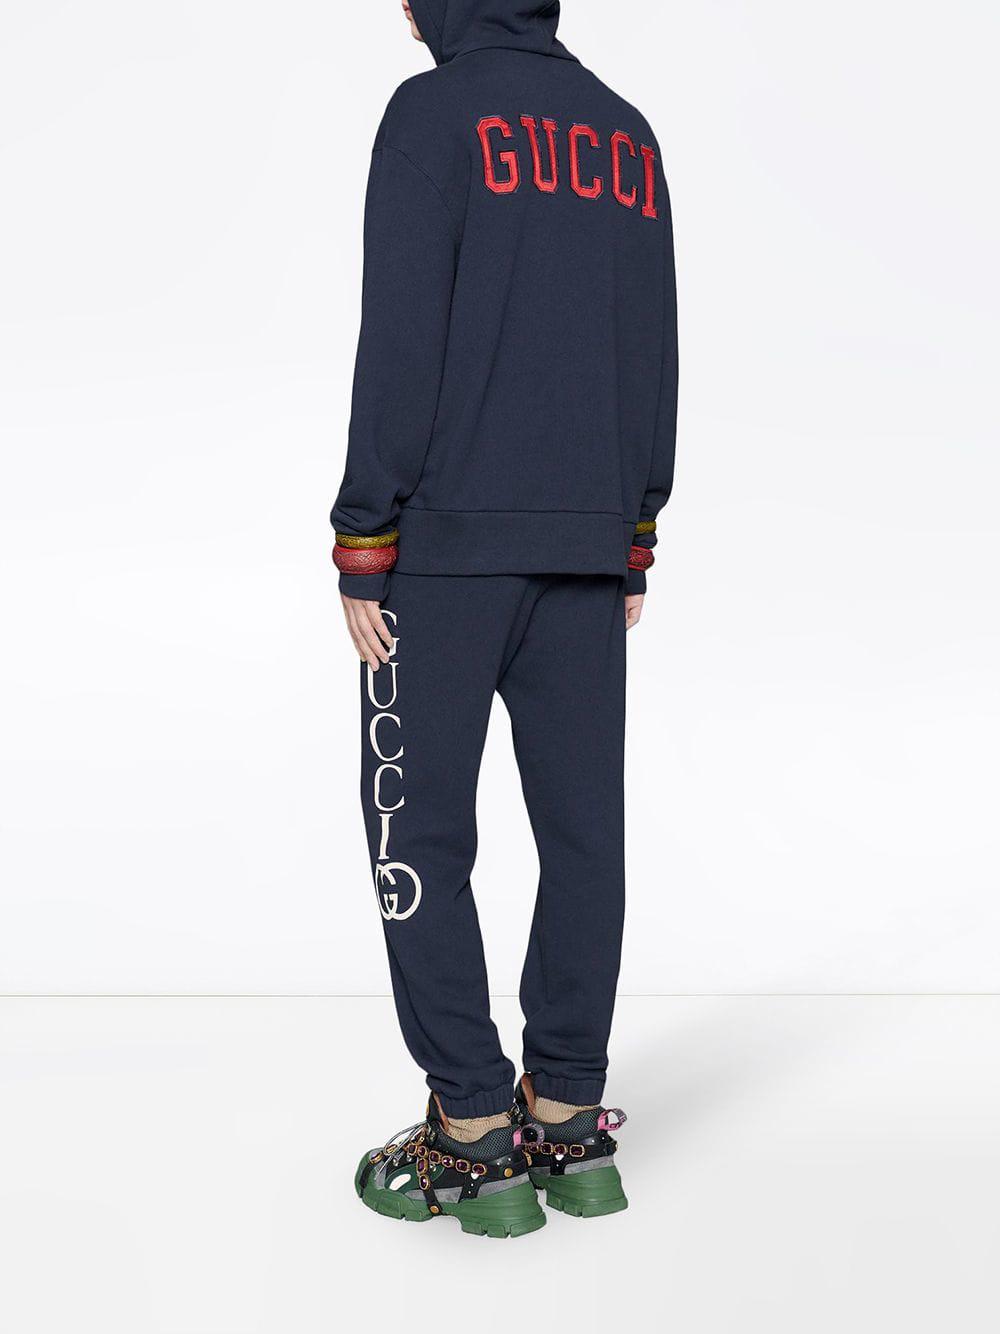 Gucci Sweatshirt With Ny Yankeestm Patch in Blue for Men | Lyst